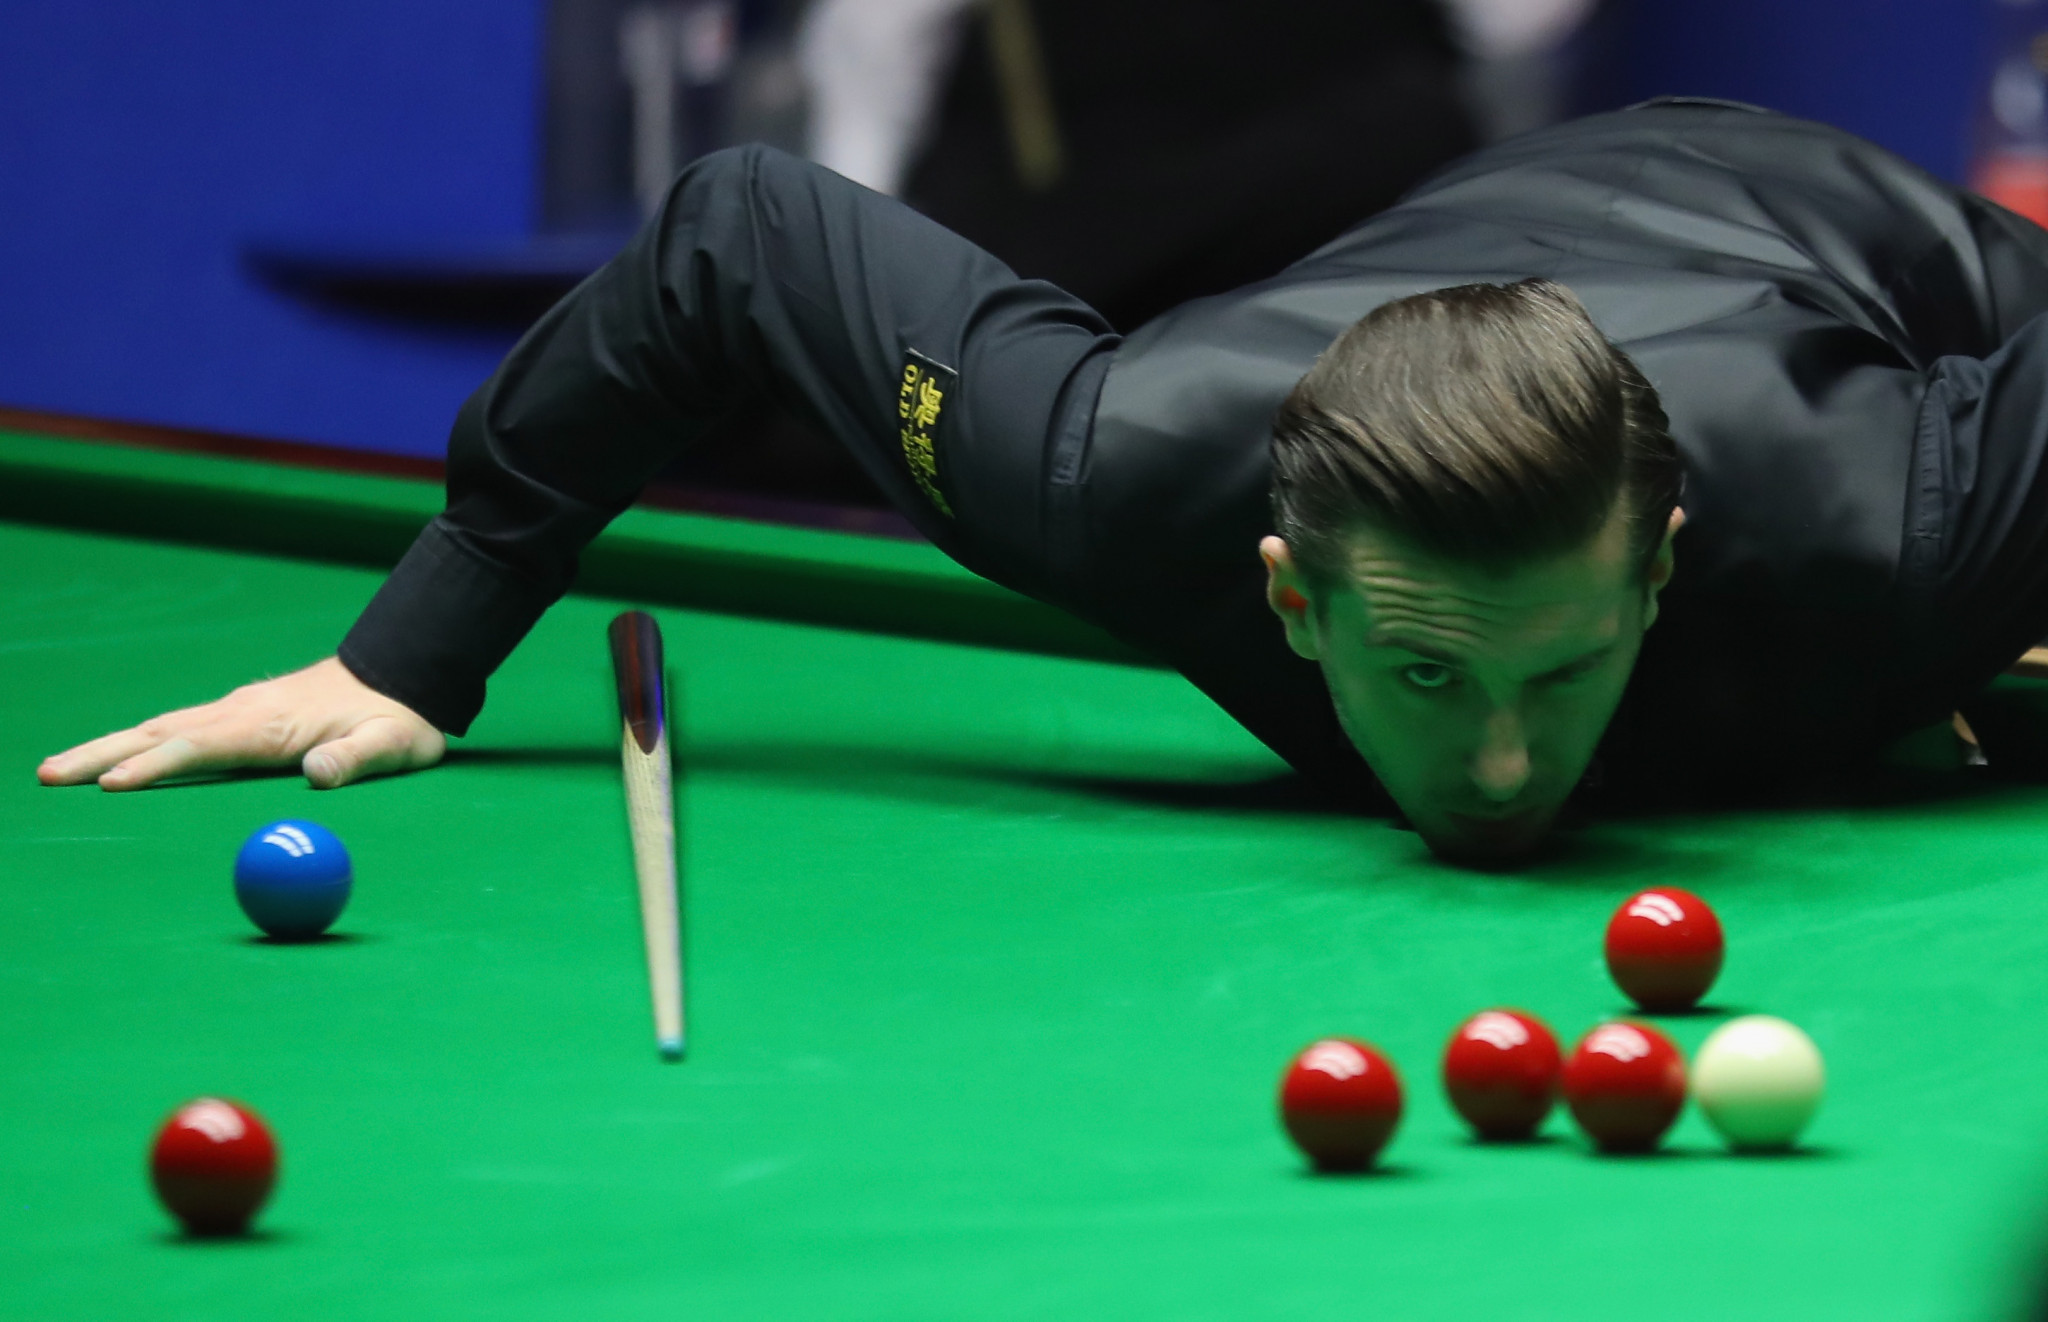 Three-time world champion Mark Selby reached the quarter-finals of the World Snooker Championship today, after being taken to a deciding frame by Noppon Saengkham ©Getty Images